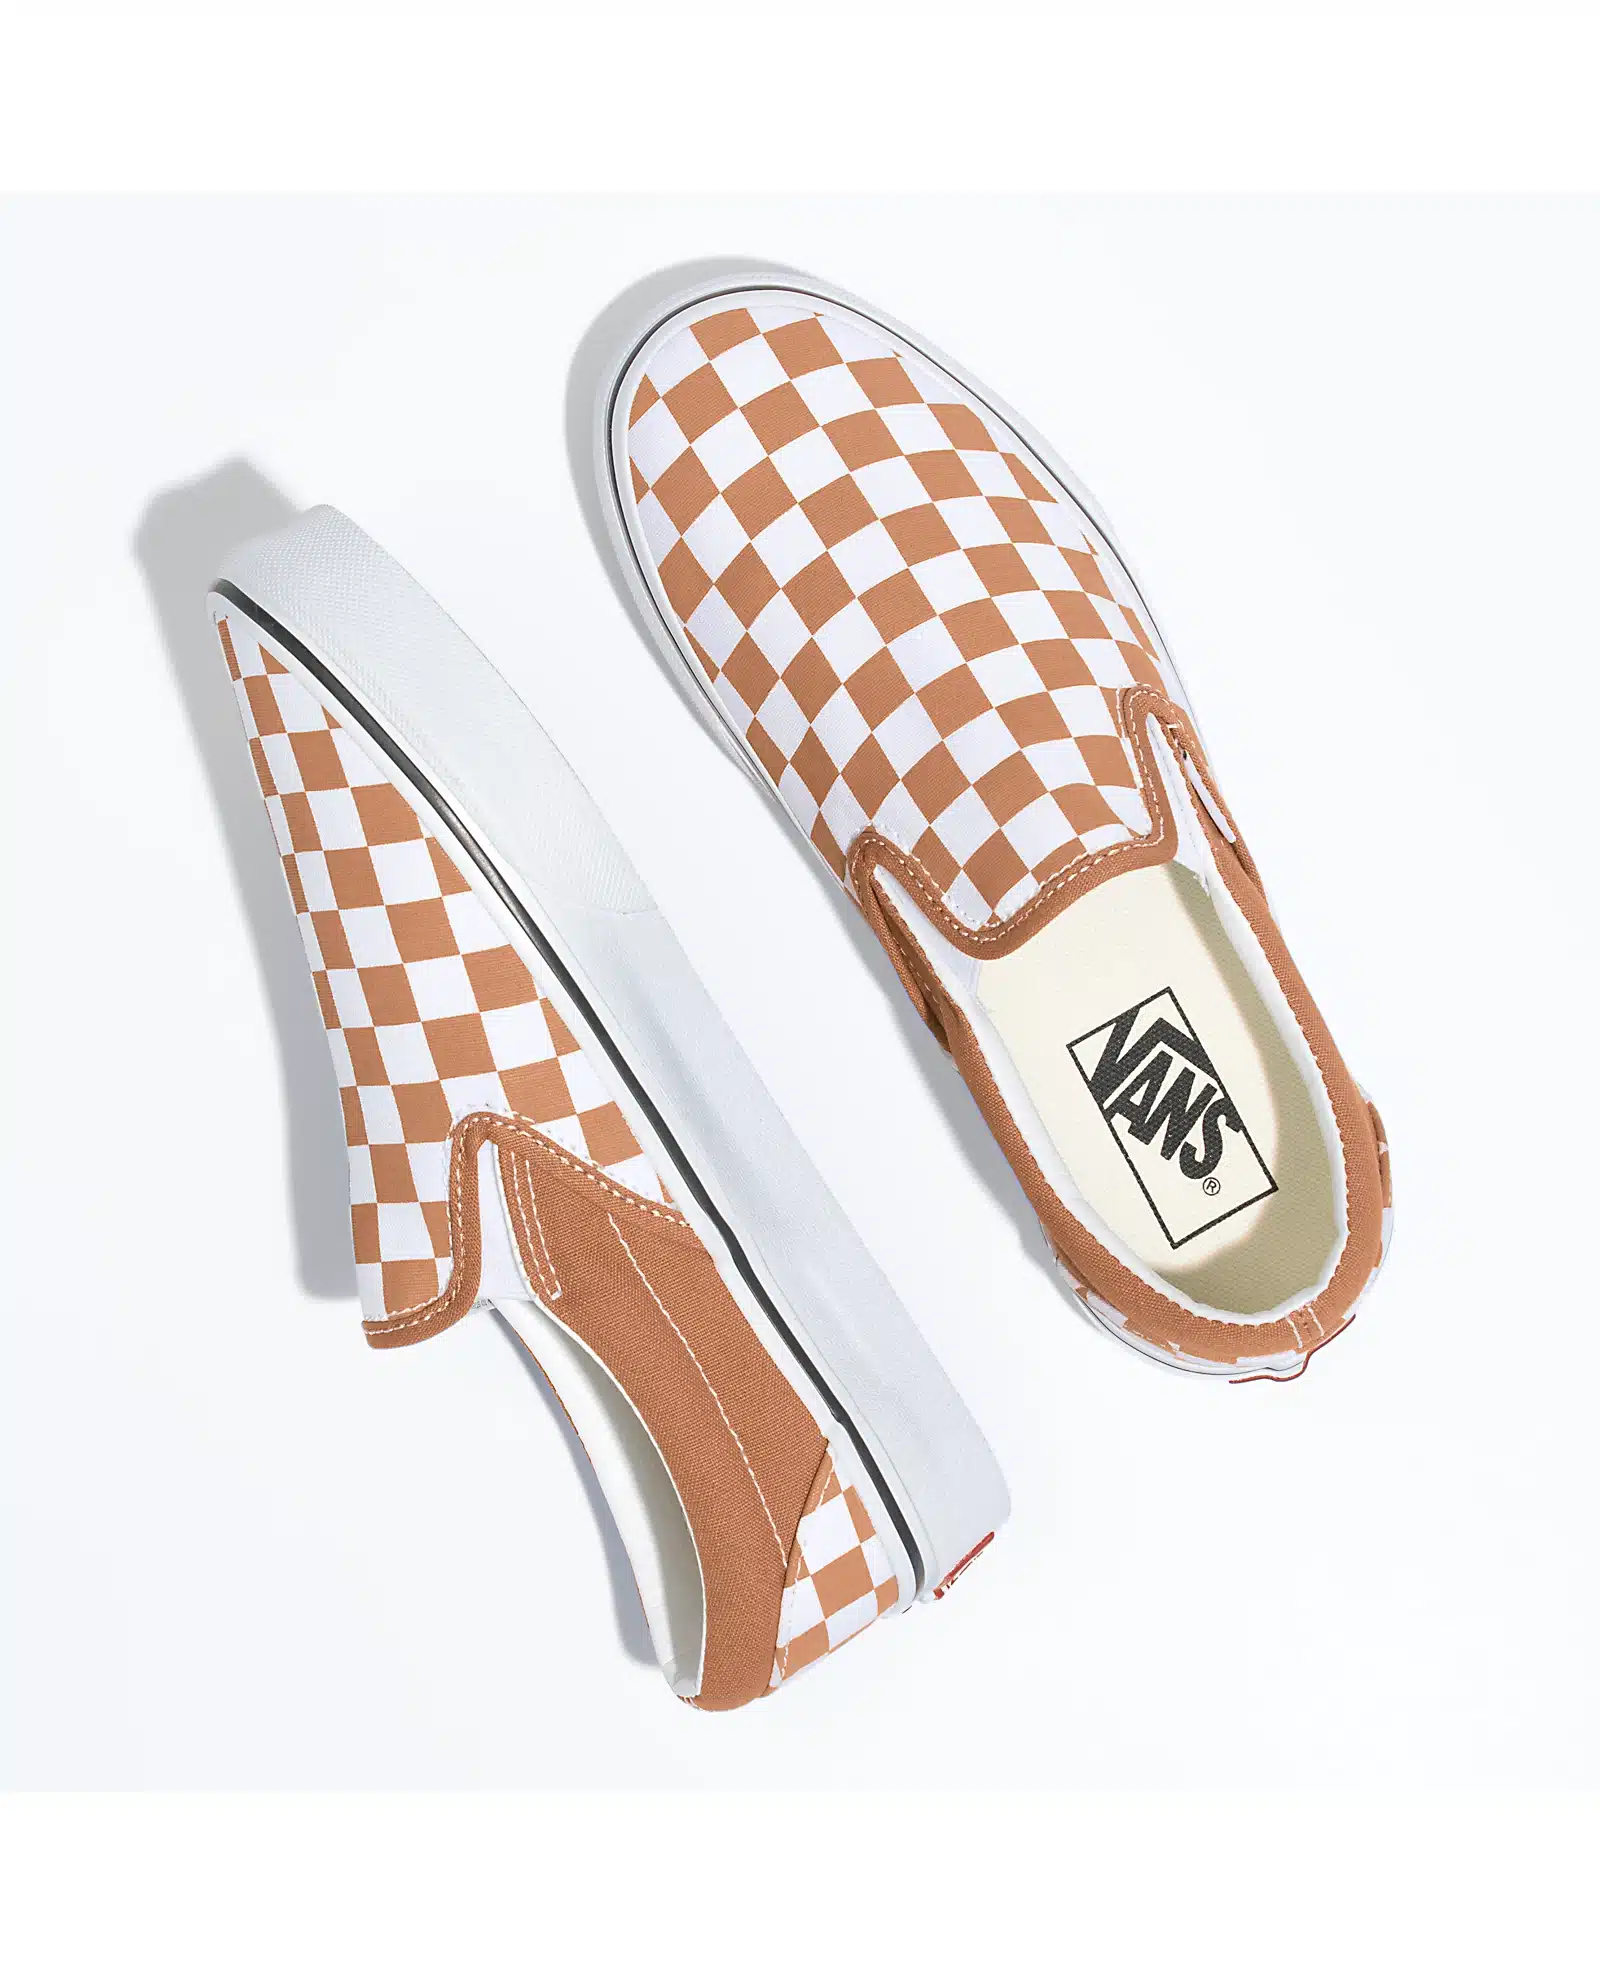 Vans Shoe Sale - Extra 25% Off + FREE Shipping Right Now! - Thrifty NW Mom